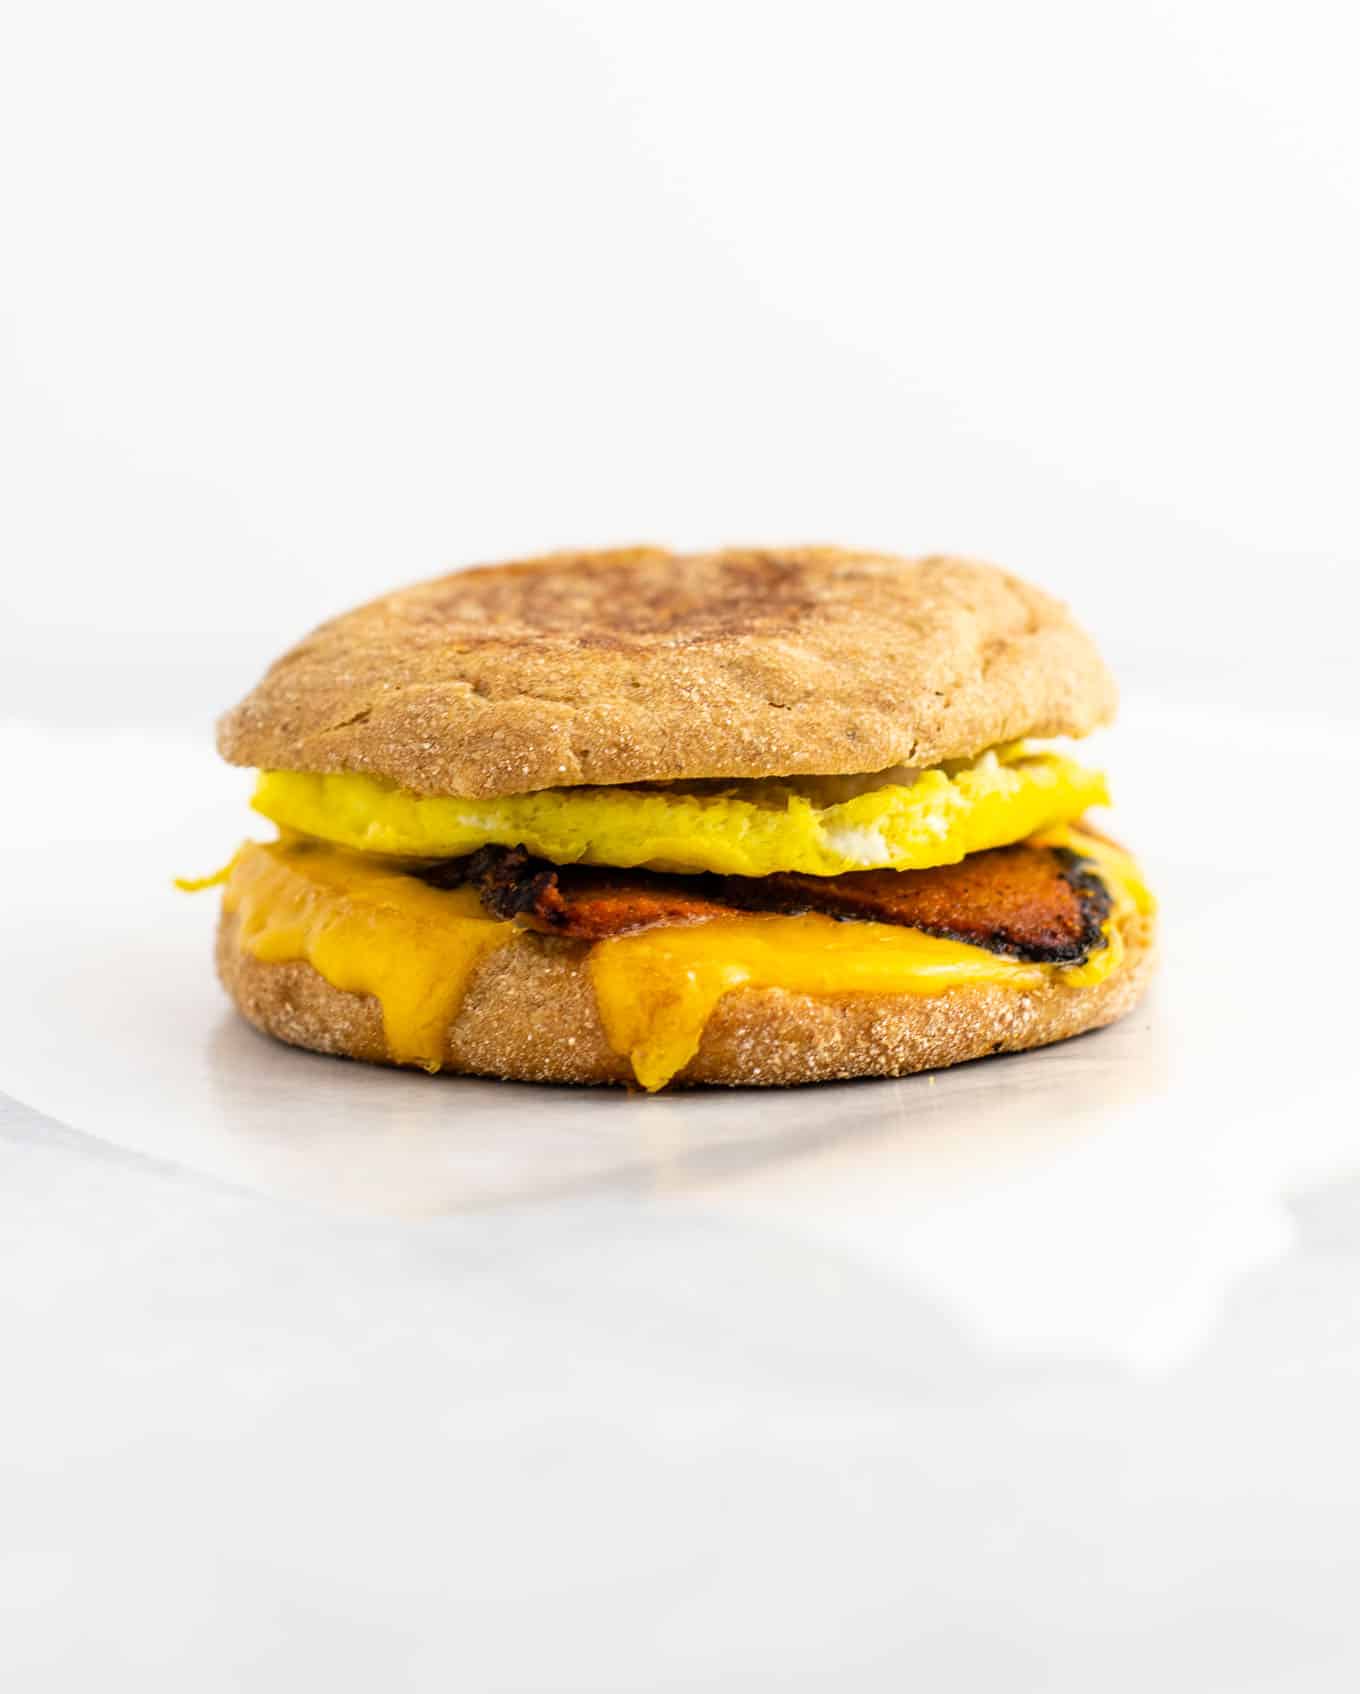 Meal Prep Vegetarian breakfast sandwich - these easy English muffin breakfast sandwiches taste amazing and are so easy to make! #vegetarian #breakfast #mealprep #englishmuffin #breakfastsandwich 